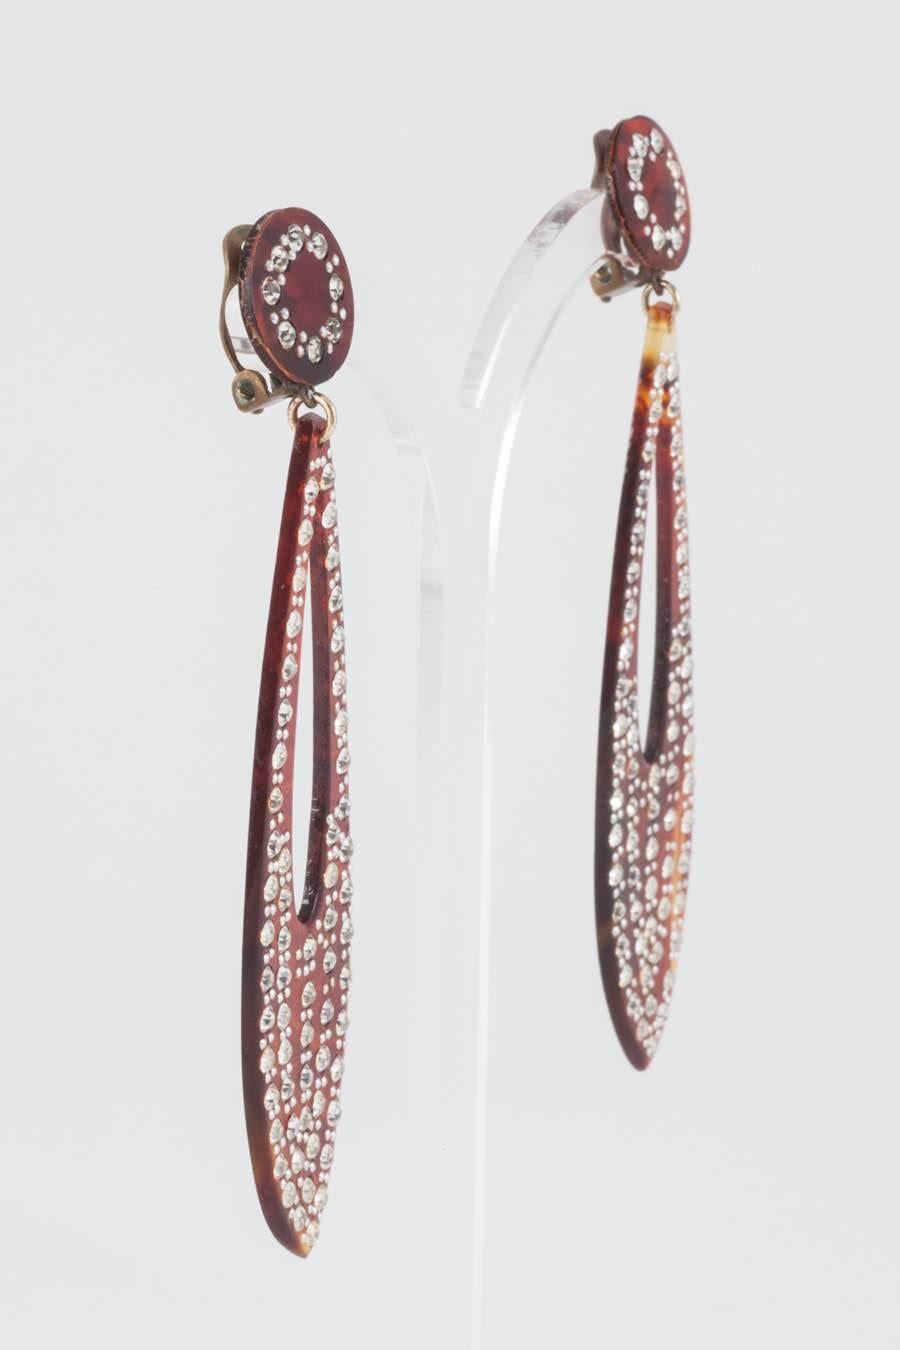 Women's French 'tortoiseshell' celluloid and paste long drop earrings, 1920s